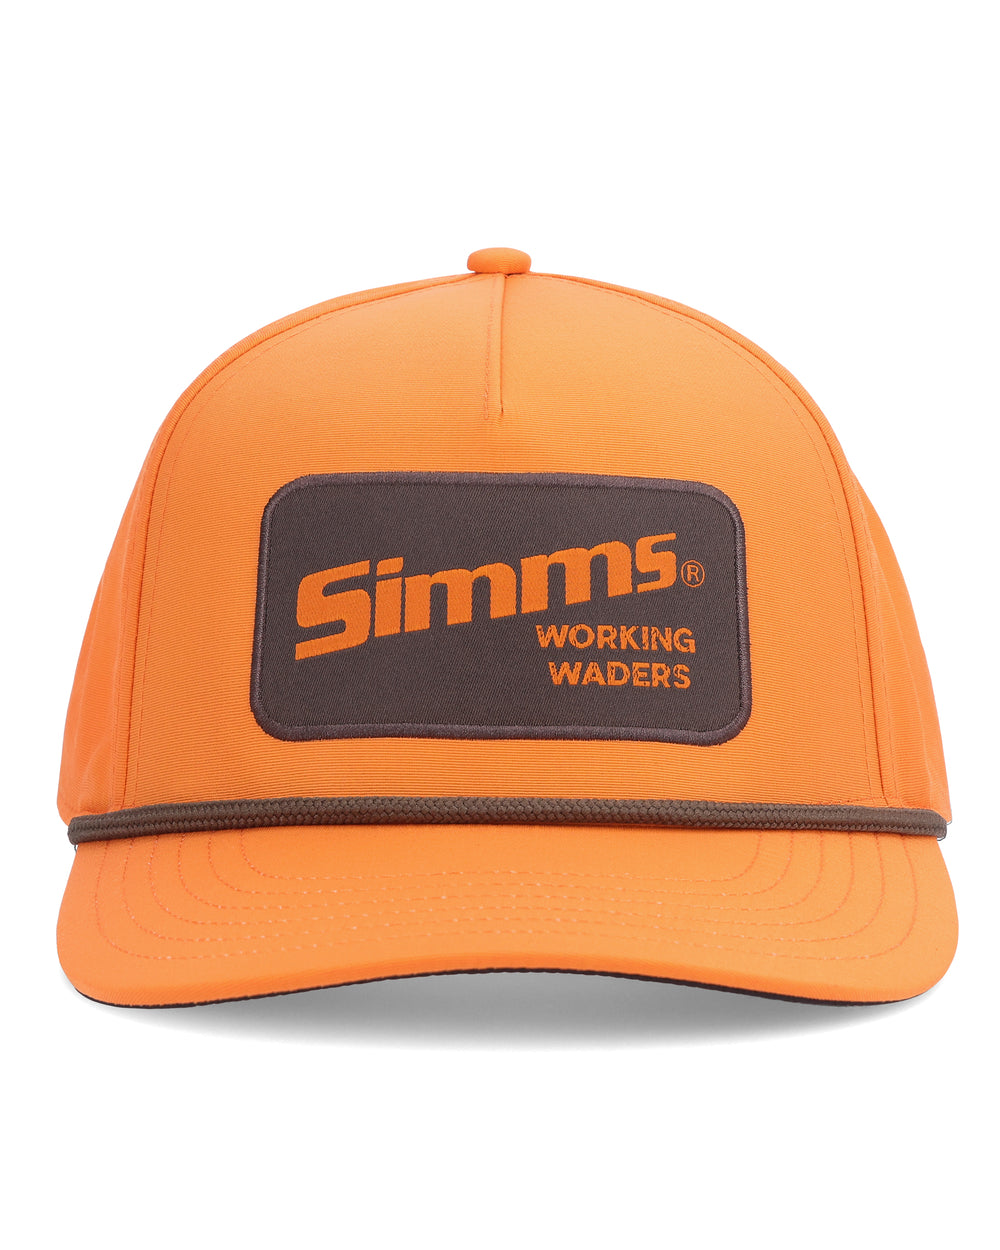 Simms Captains Cap | Simms Fishing Products